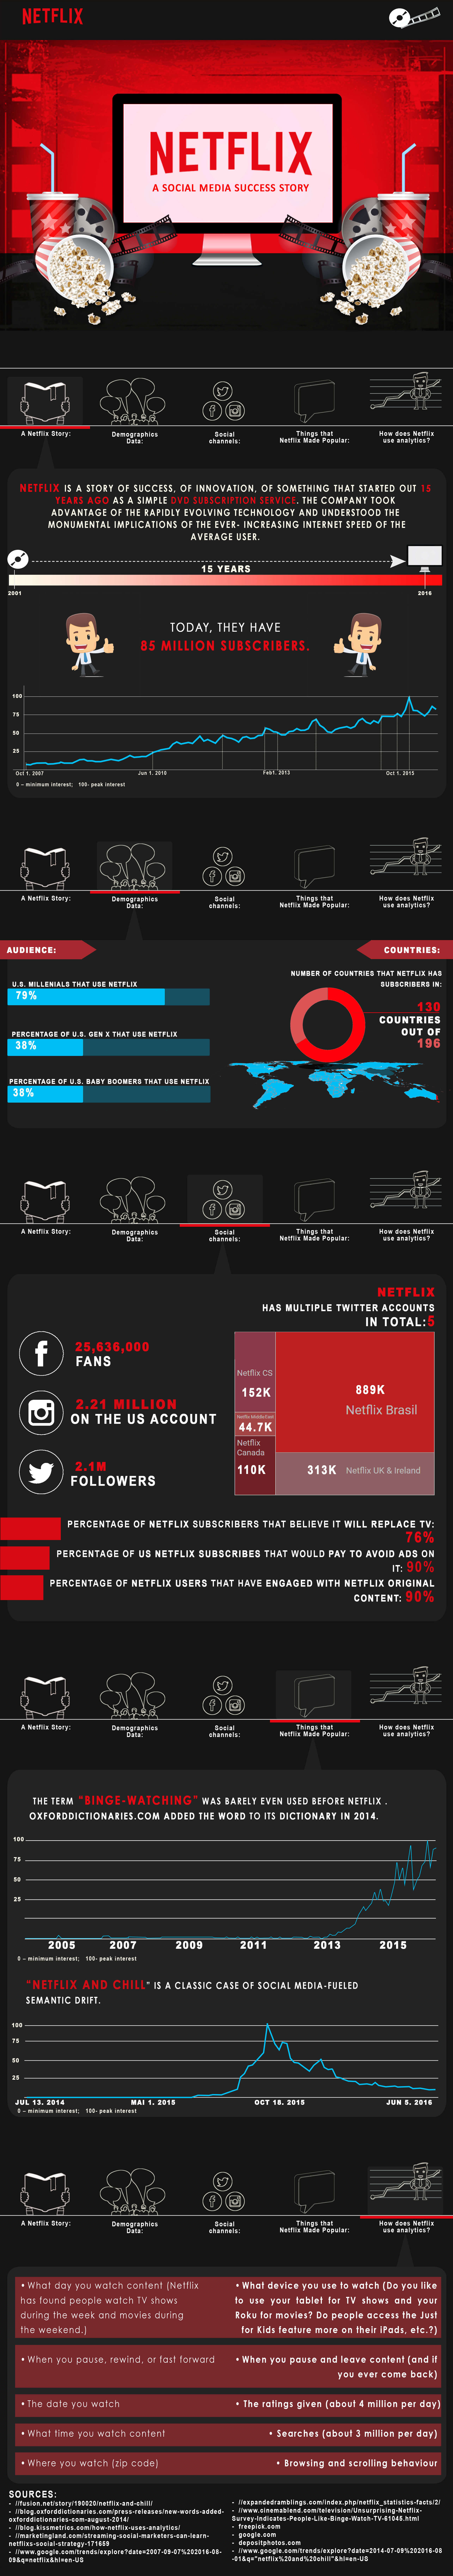 Netflix rise to success infographic